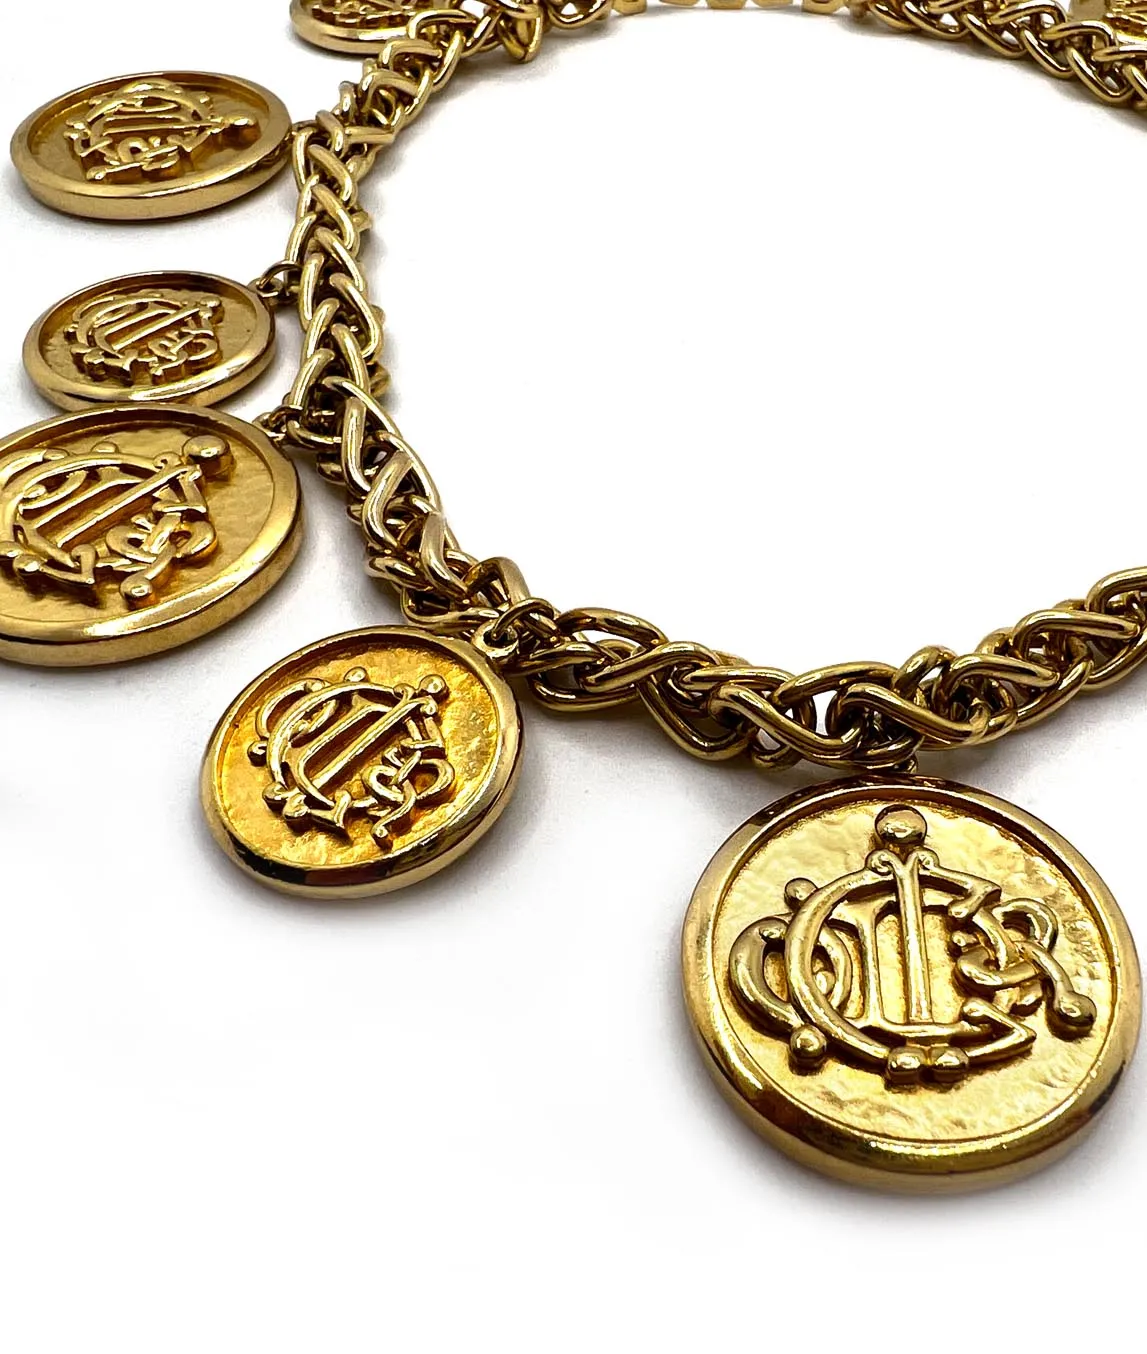 Heavy gold plated chain with Christian Dior monogram logo coins